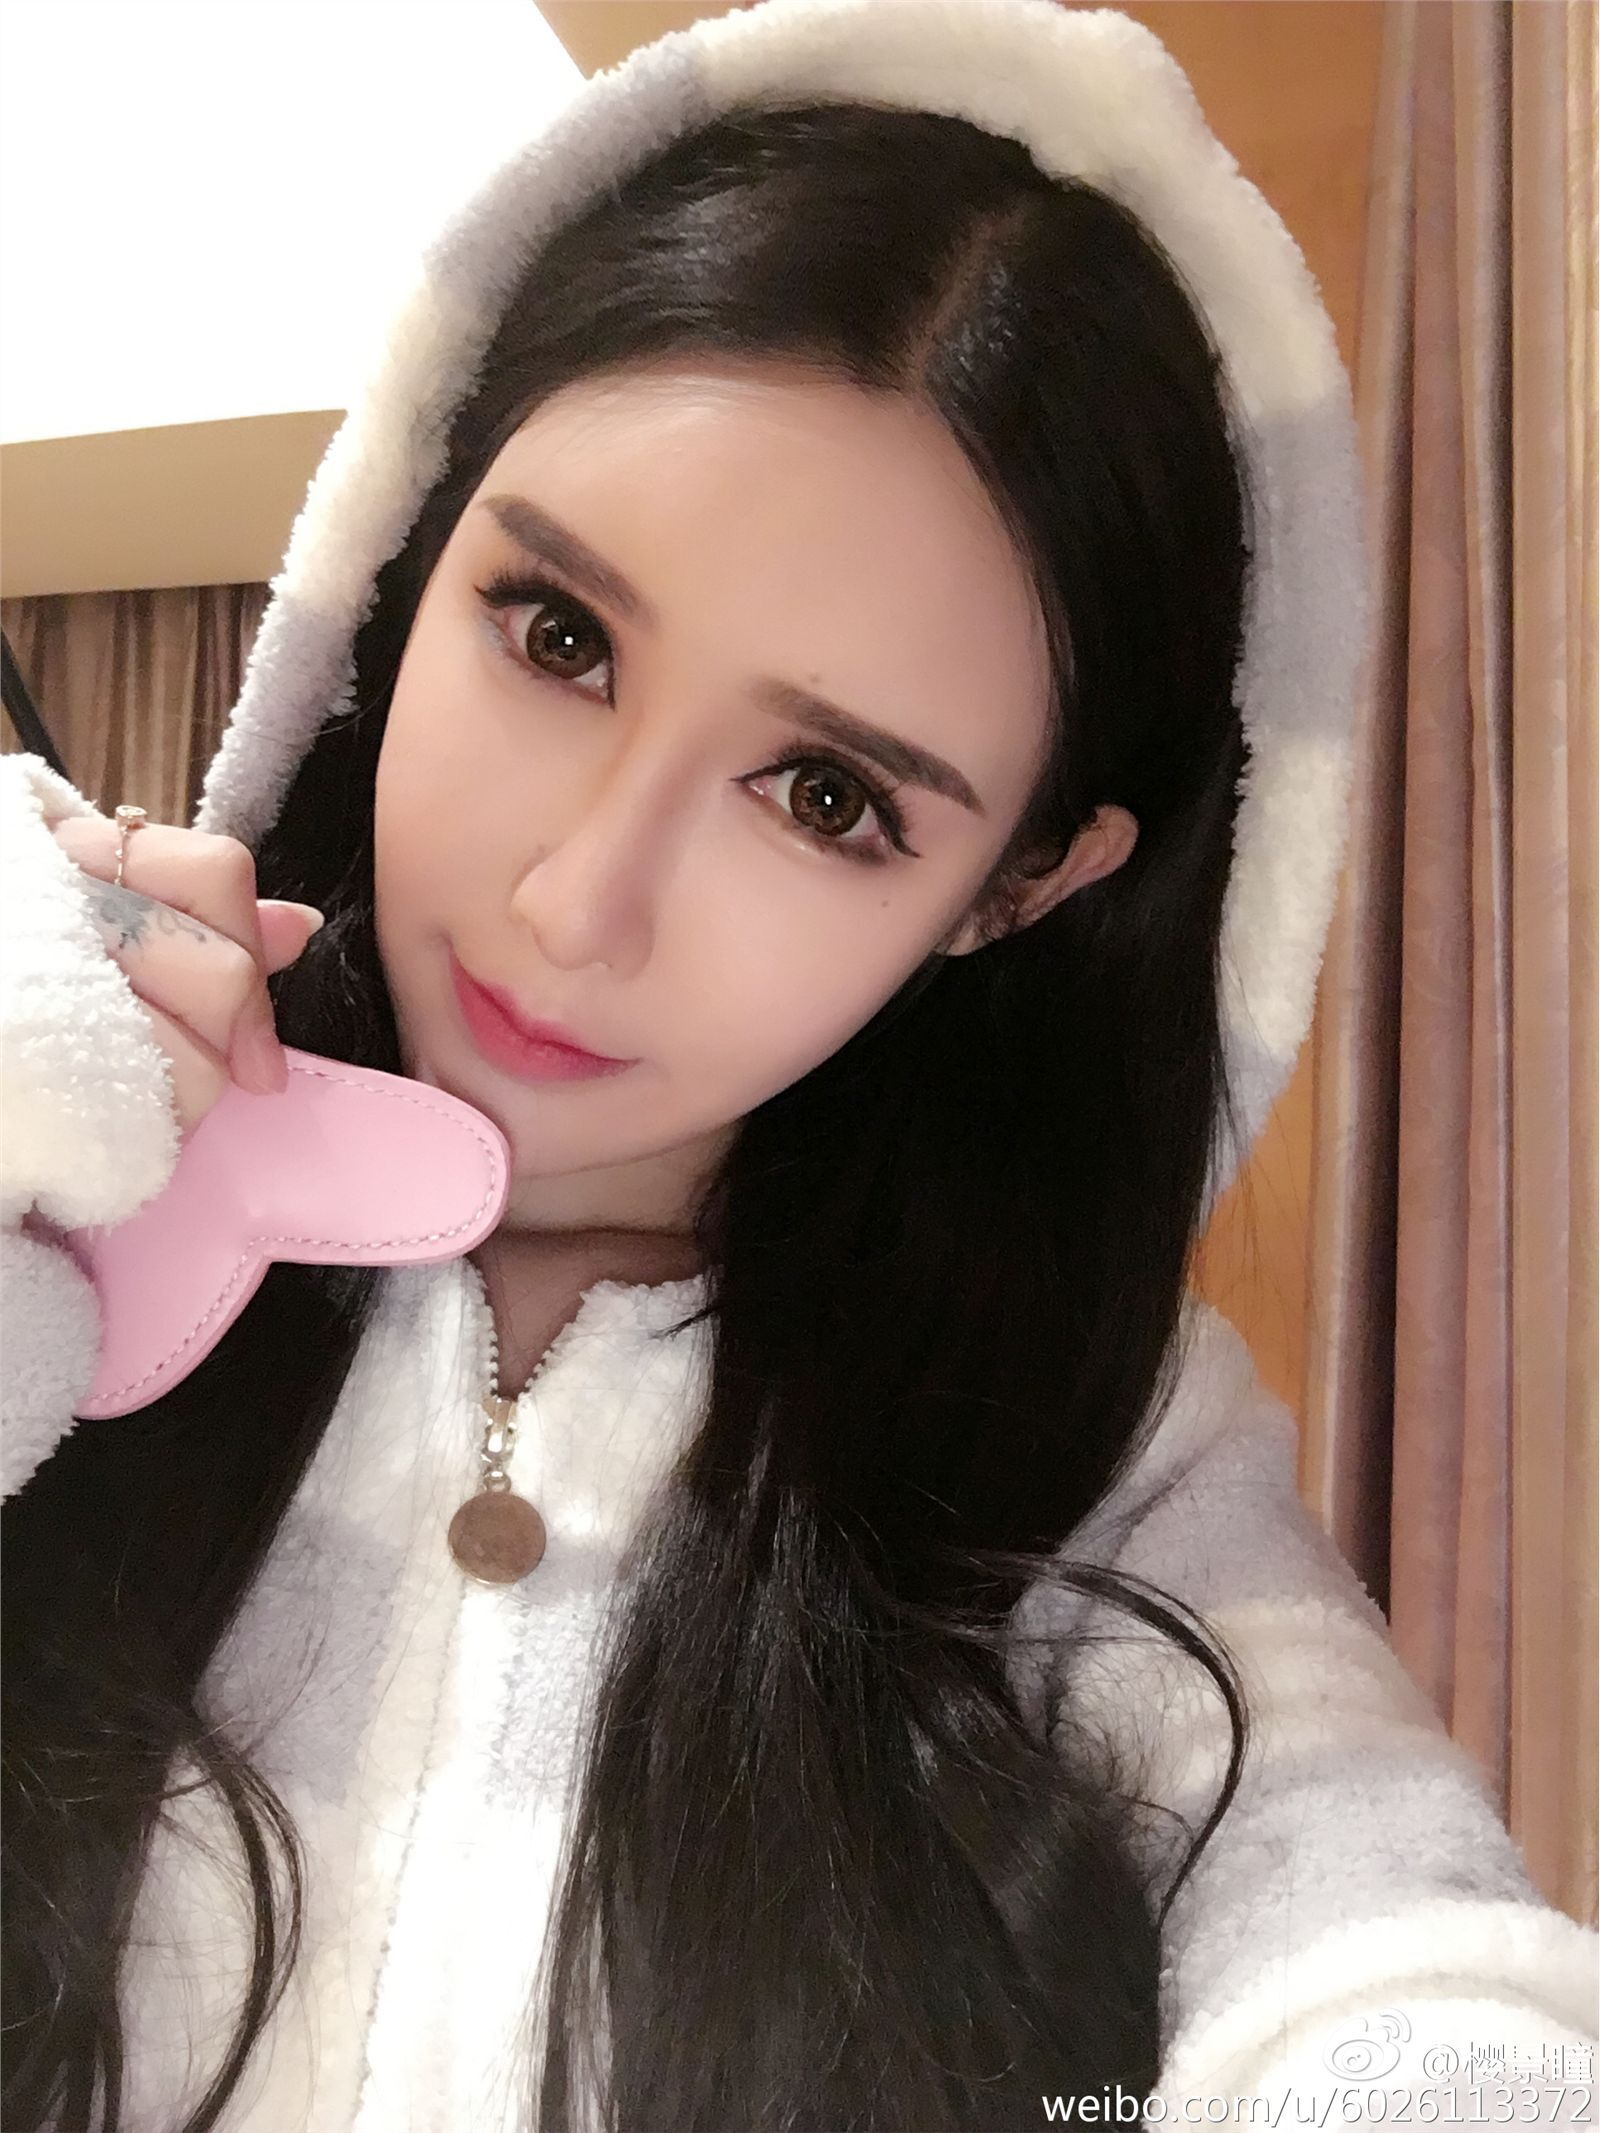 The latest album of popular model Xinyang kitty on Weibo